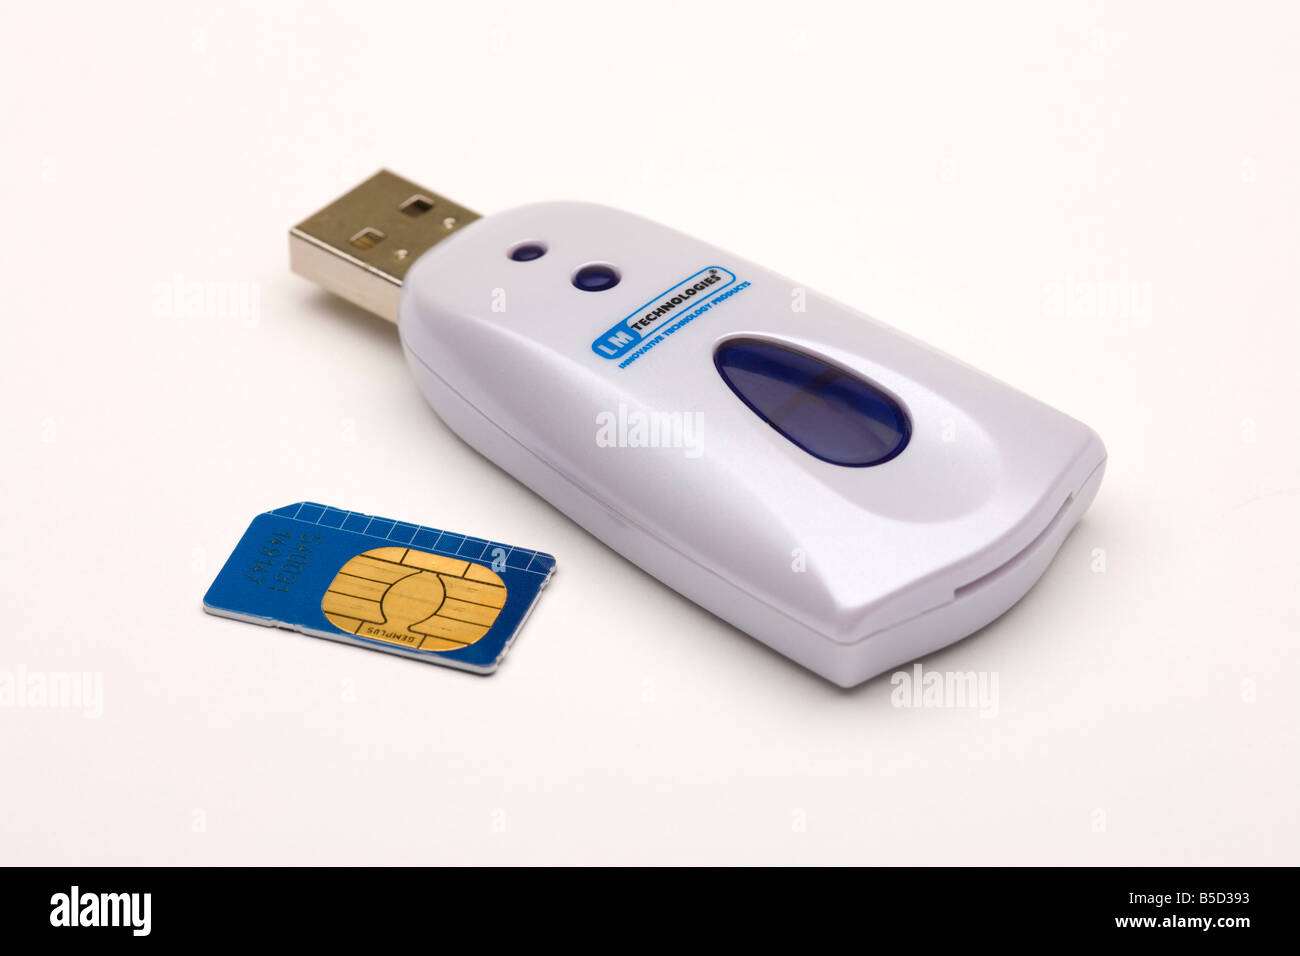 SIM card and USB reader device to save copy from / write to card Stock Photo